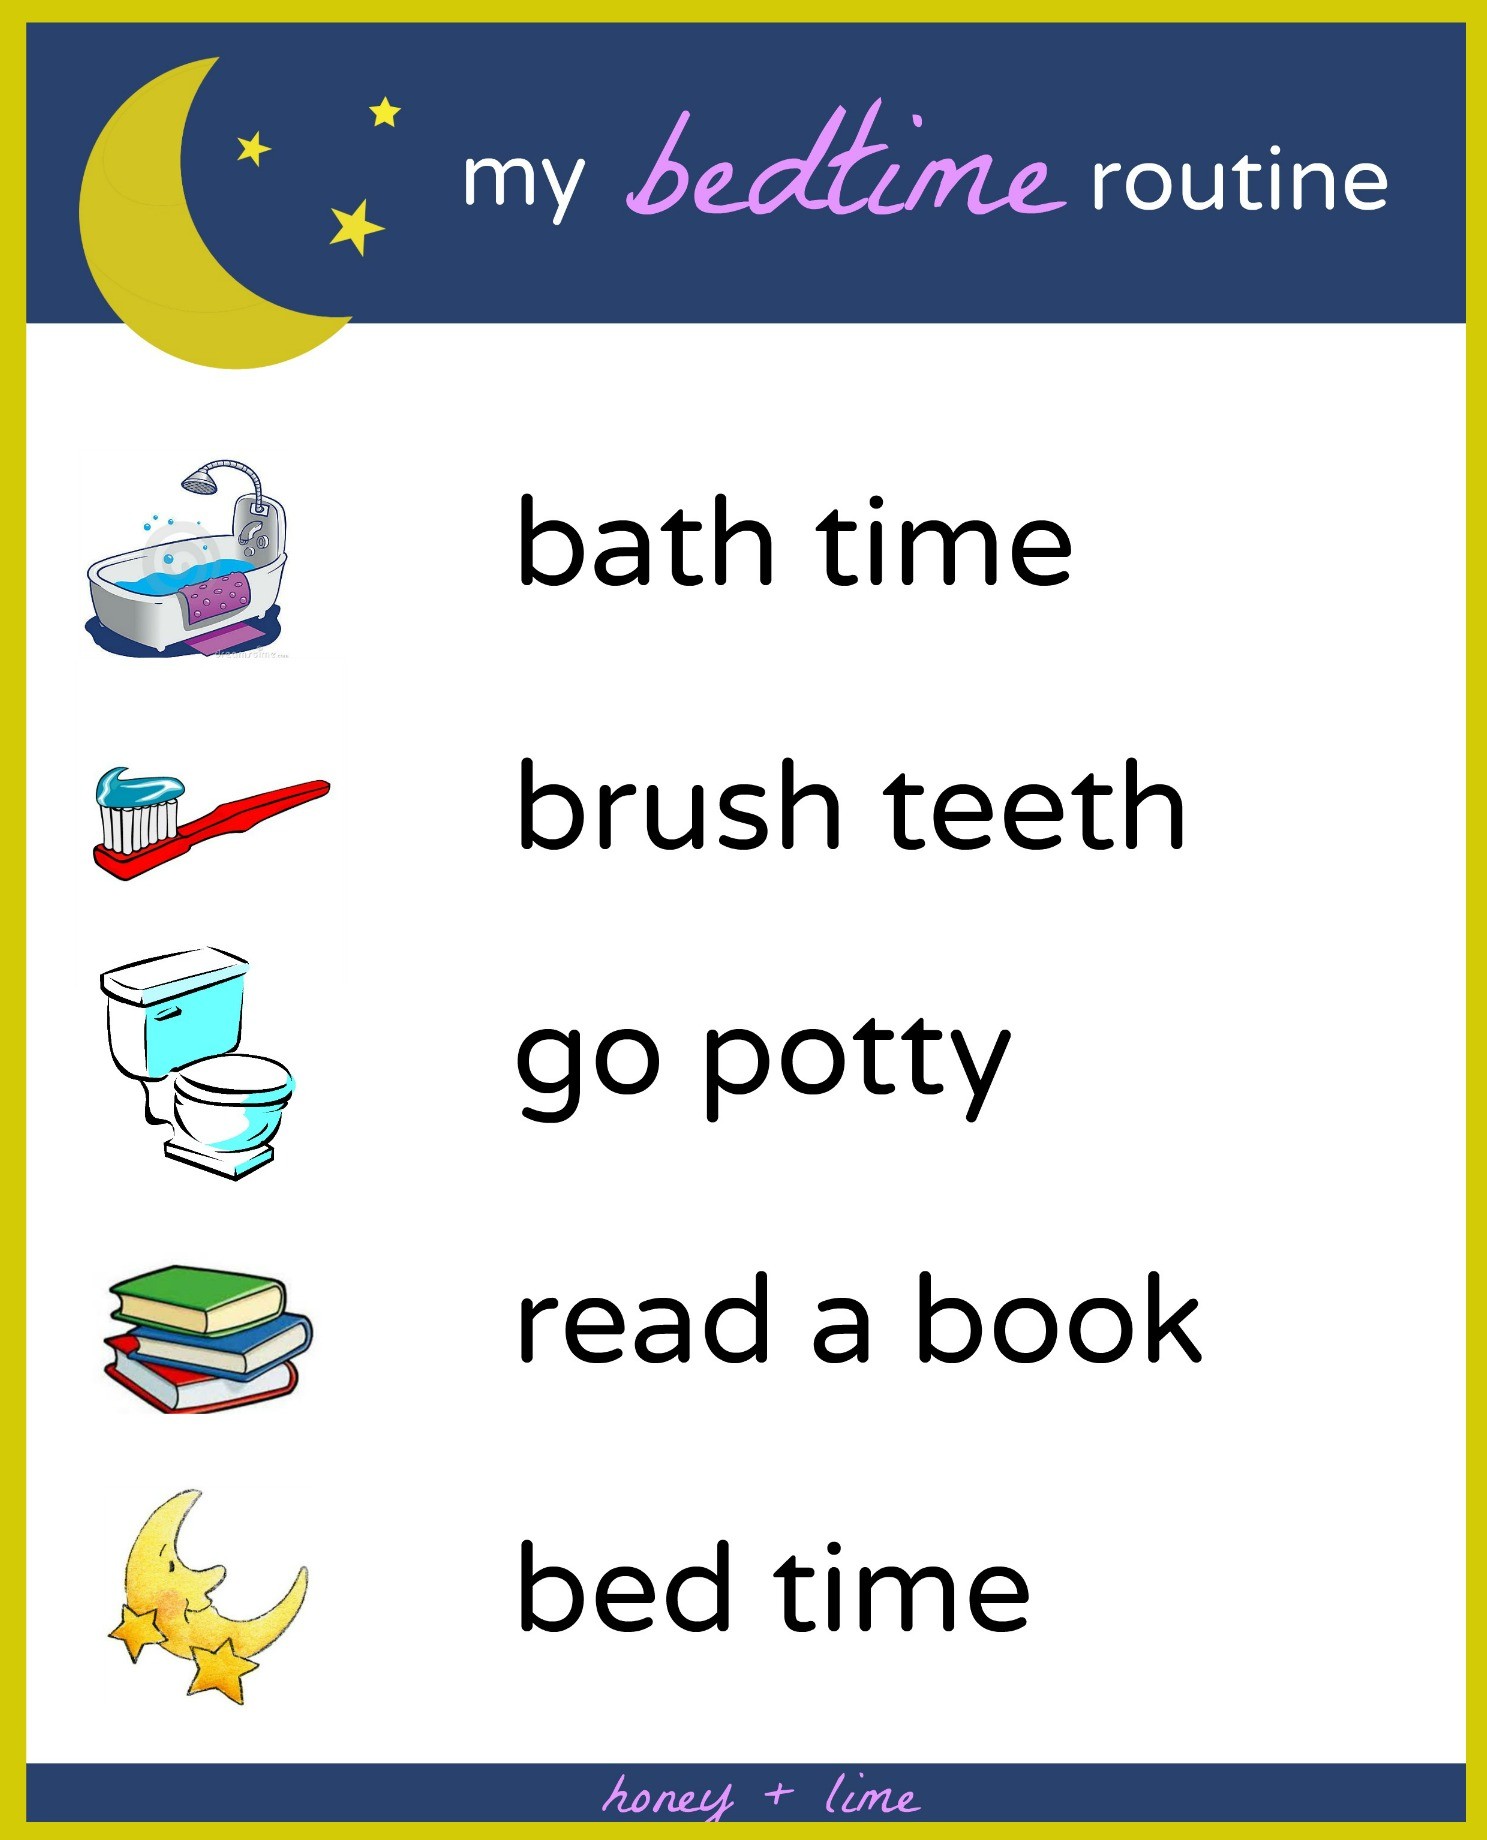 brush-book-bed-a-printable-bedtime-routine-chart-for-kids